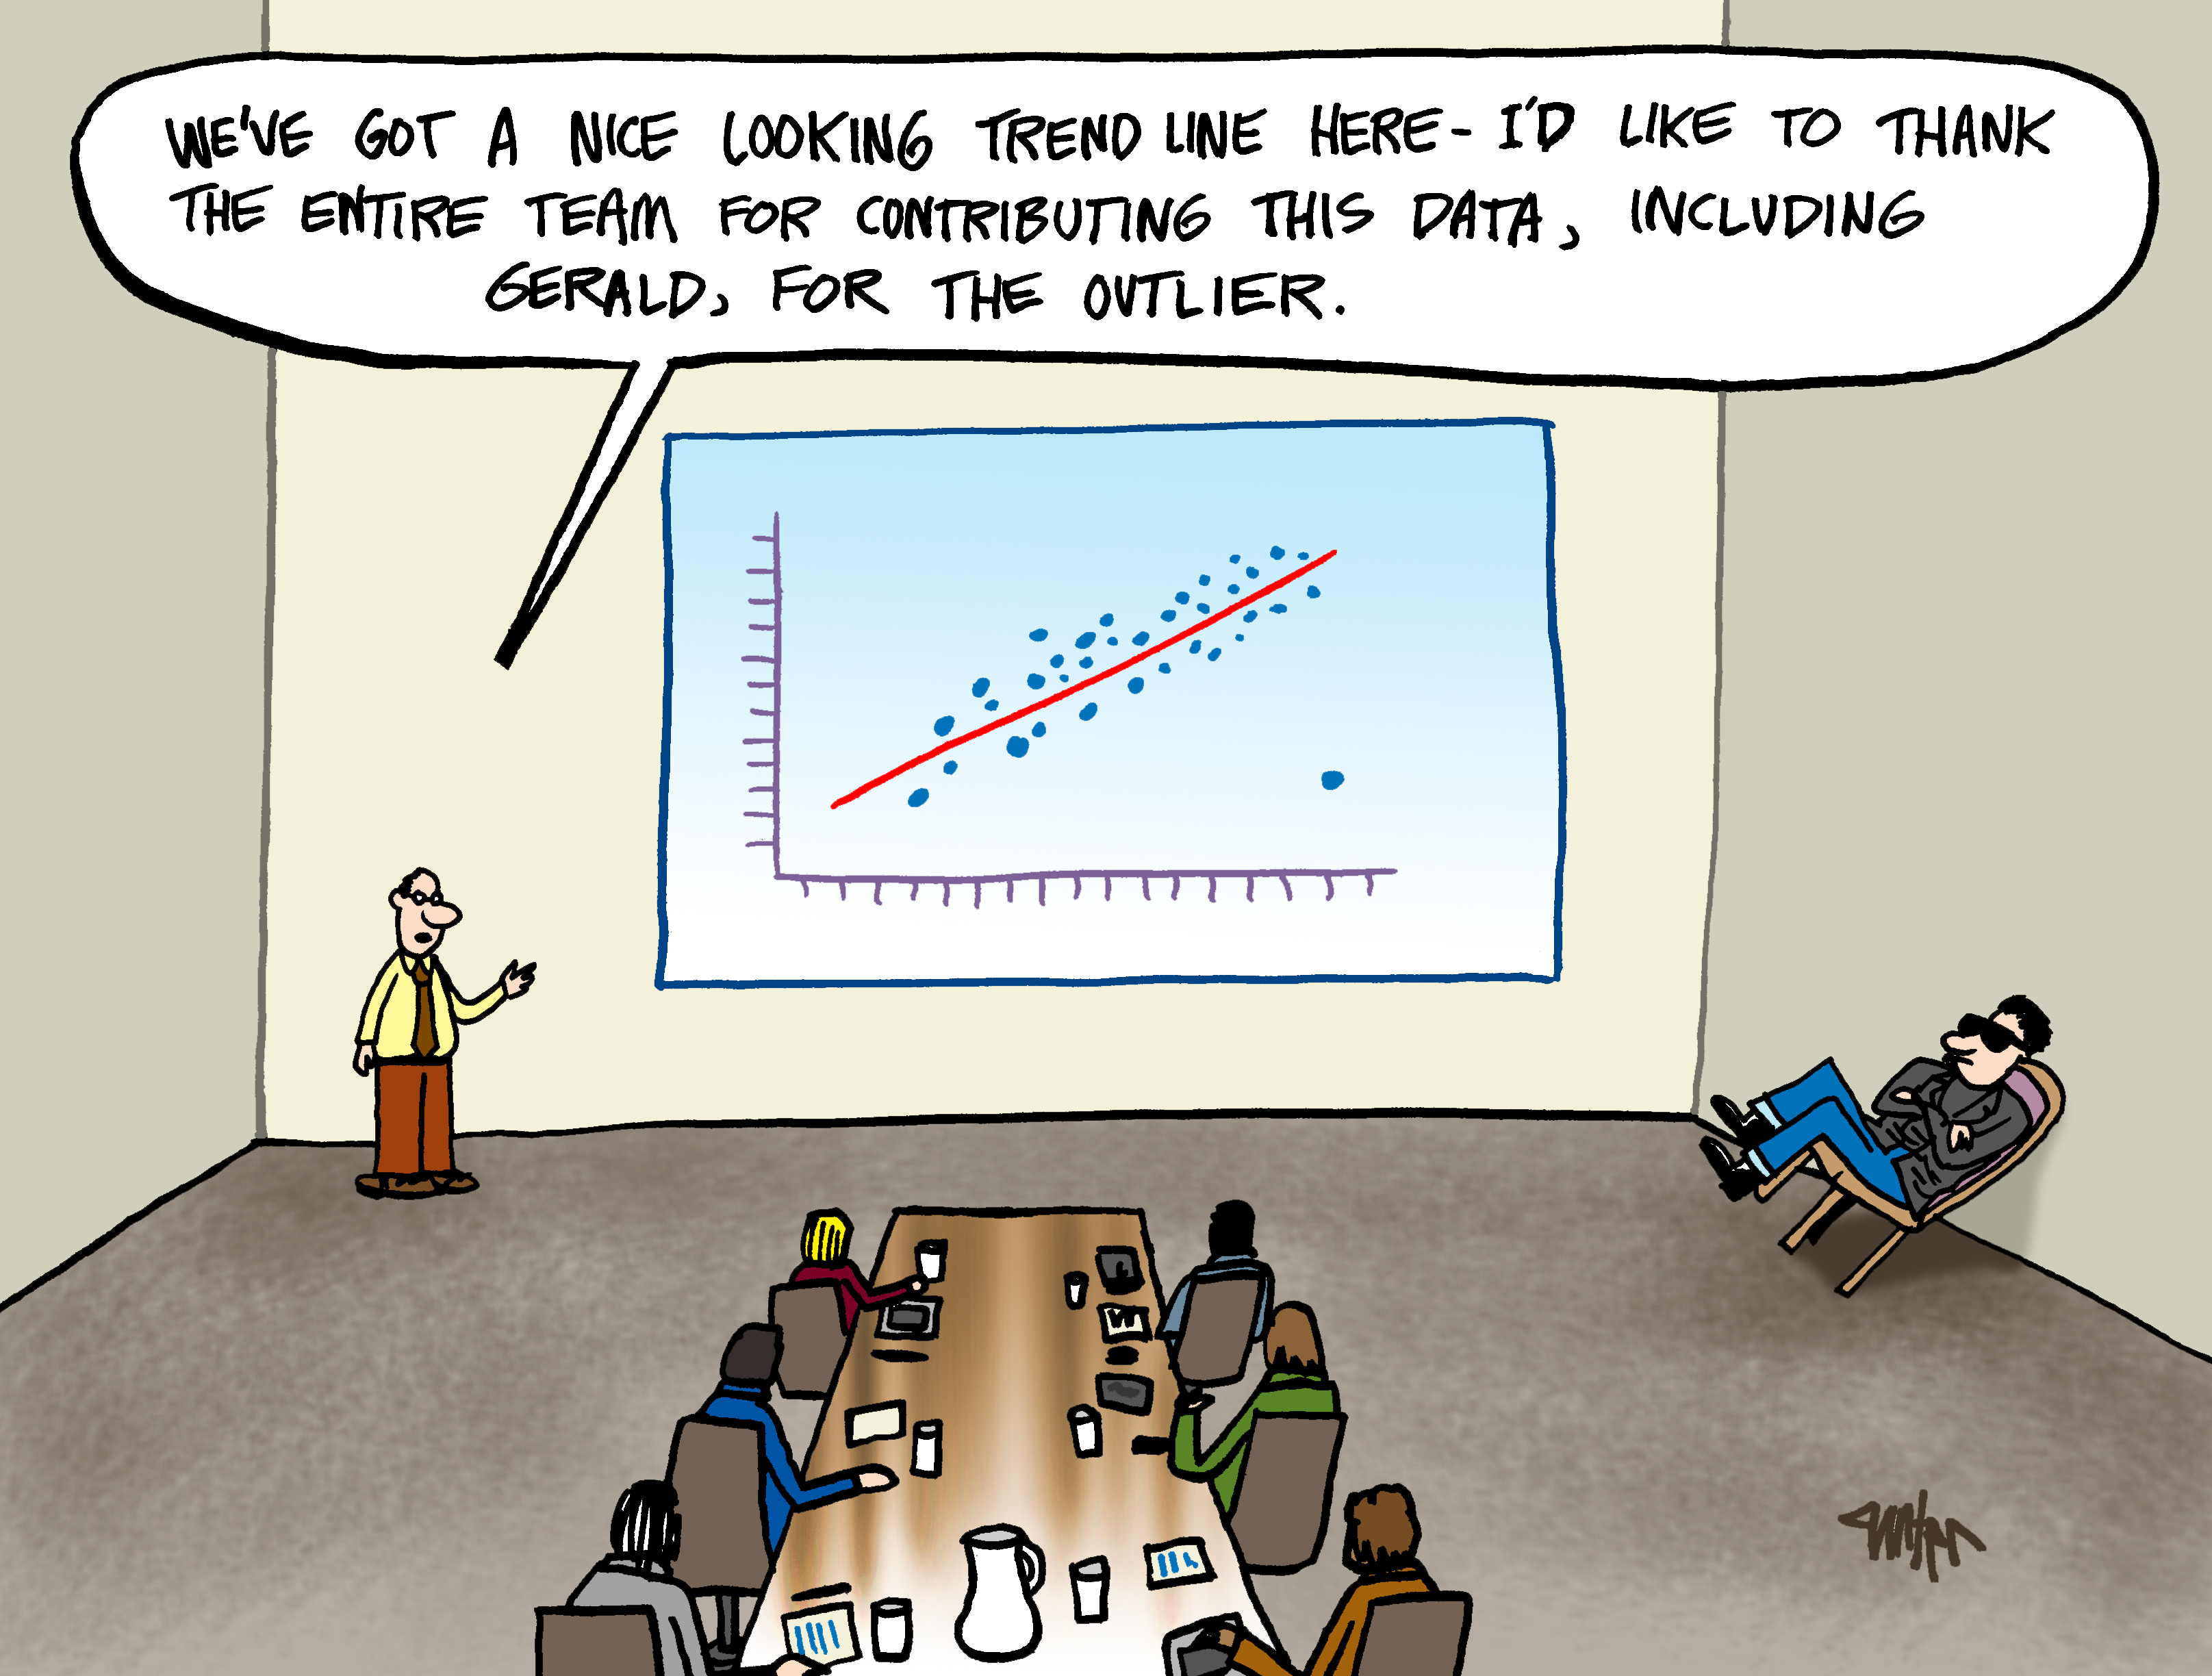 A cartoon with scatterplot on the wall,  one person in sunglasses is leaning against the wall. The boss says: We've got a nice looking trend line here - I'd like to thank the entire team for contributing this data, including Gerald for the outlier.